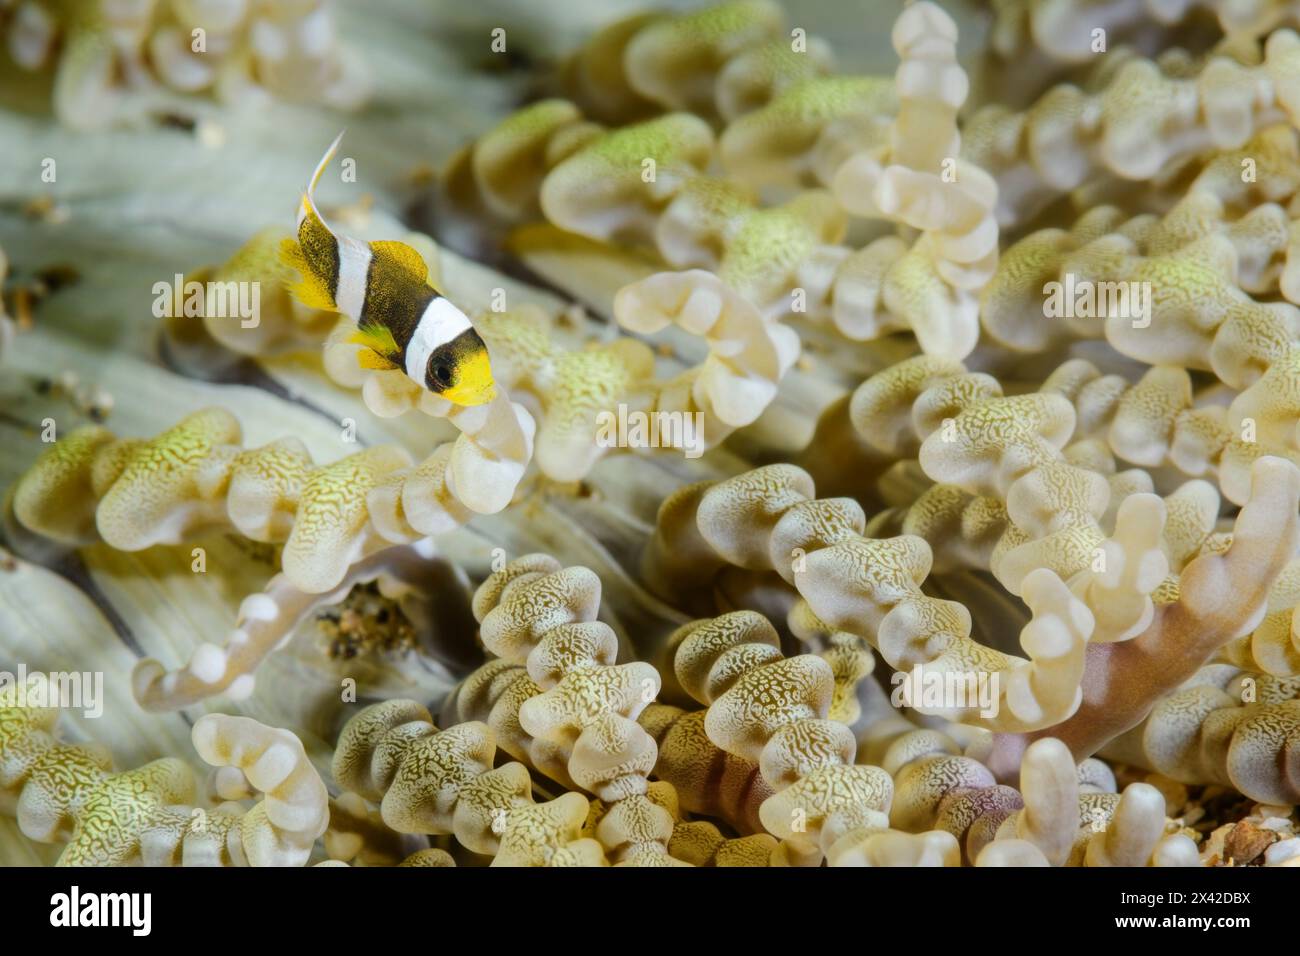 A very tiny juvenile Clark's anemonefish , Amphiprion clarkii, on the sea anemone Heteractis aurora, Lembeh Strait, North Sulawesi, Indonesia Stock Photo